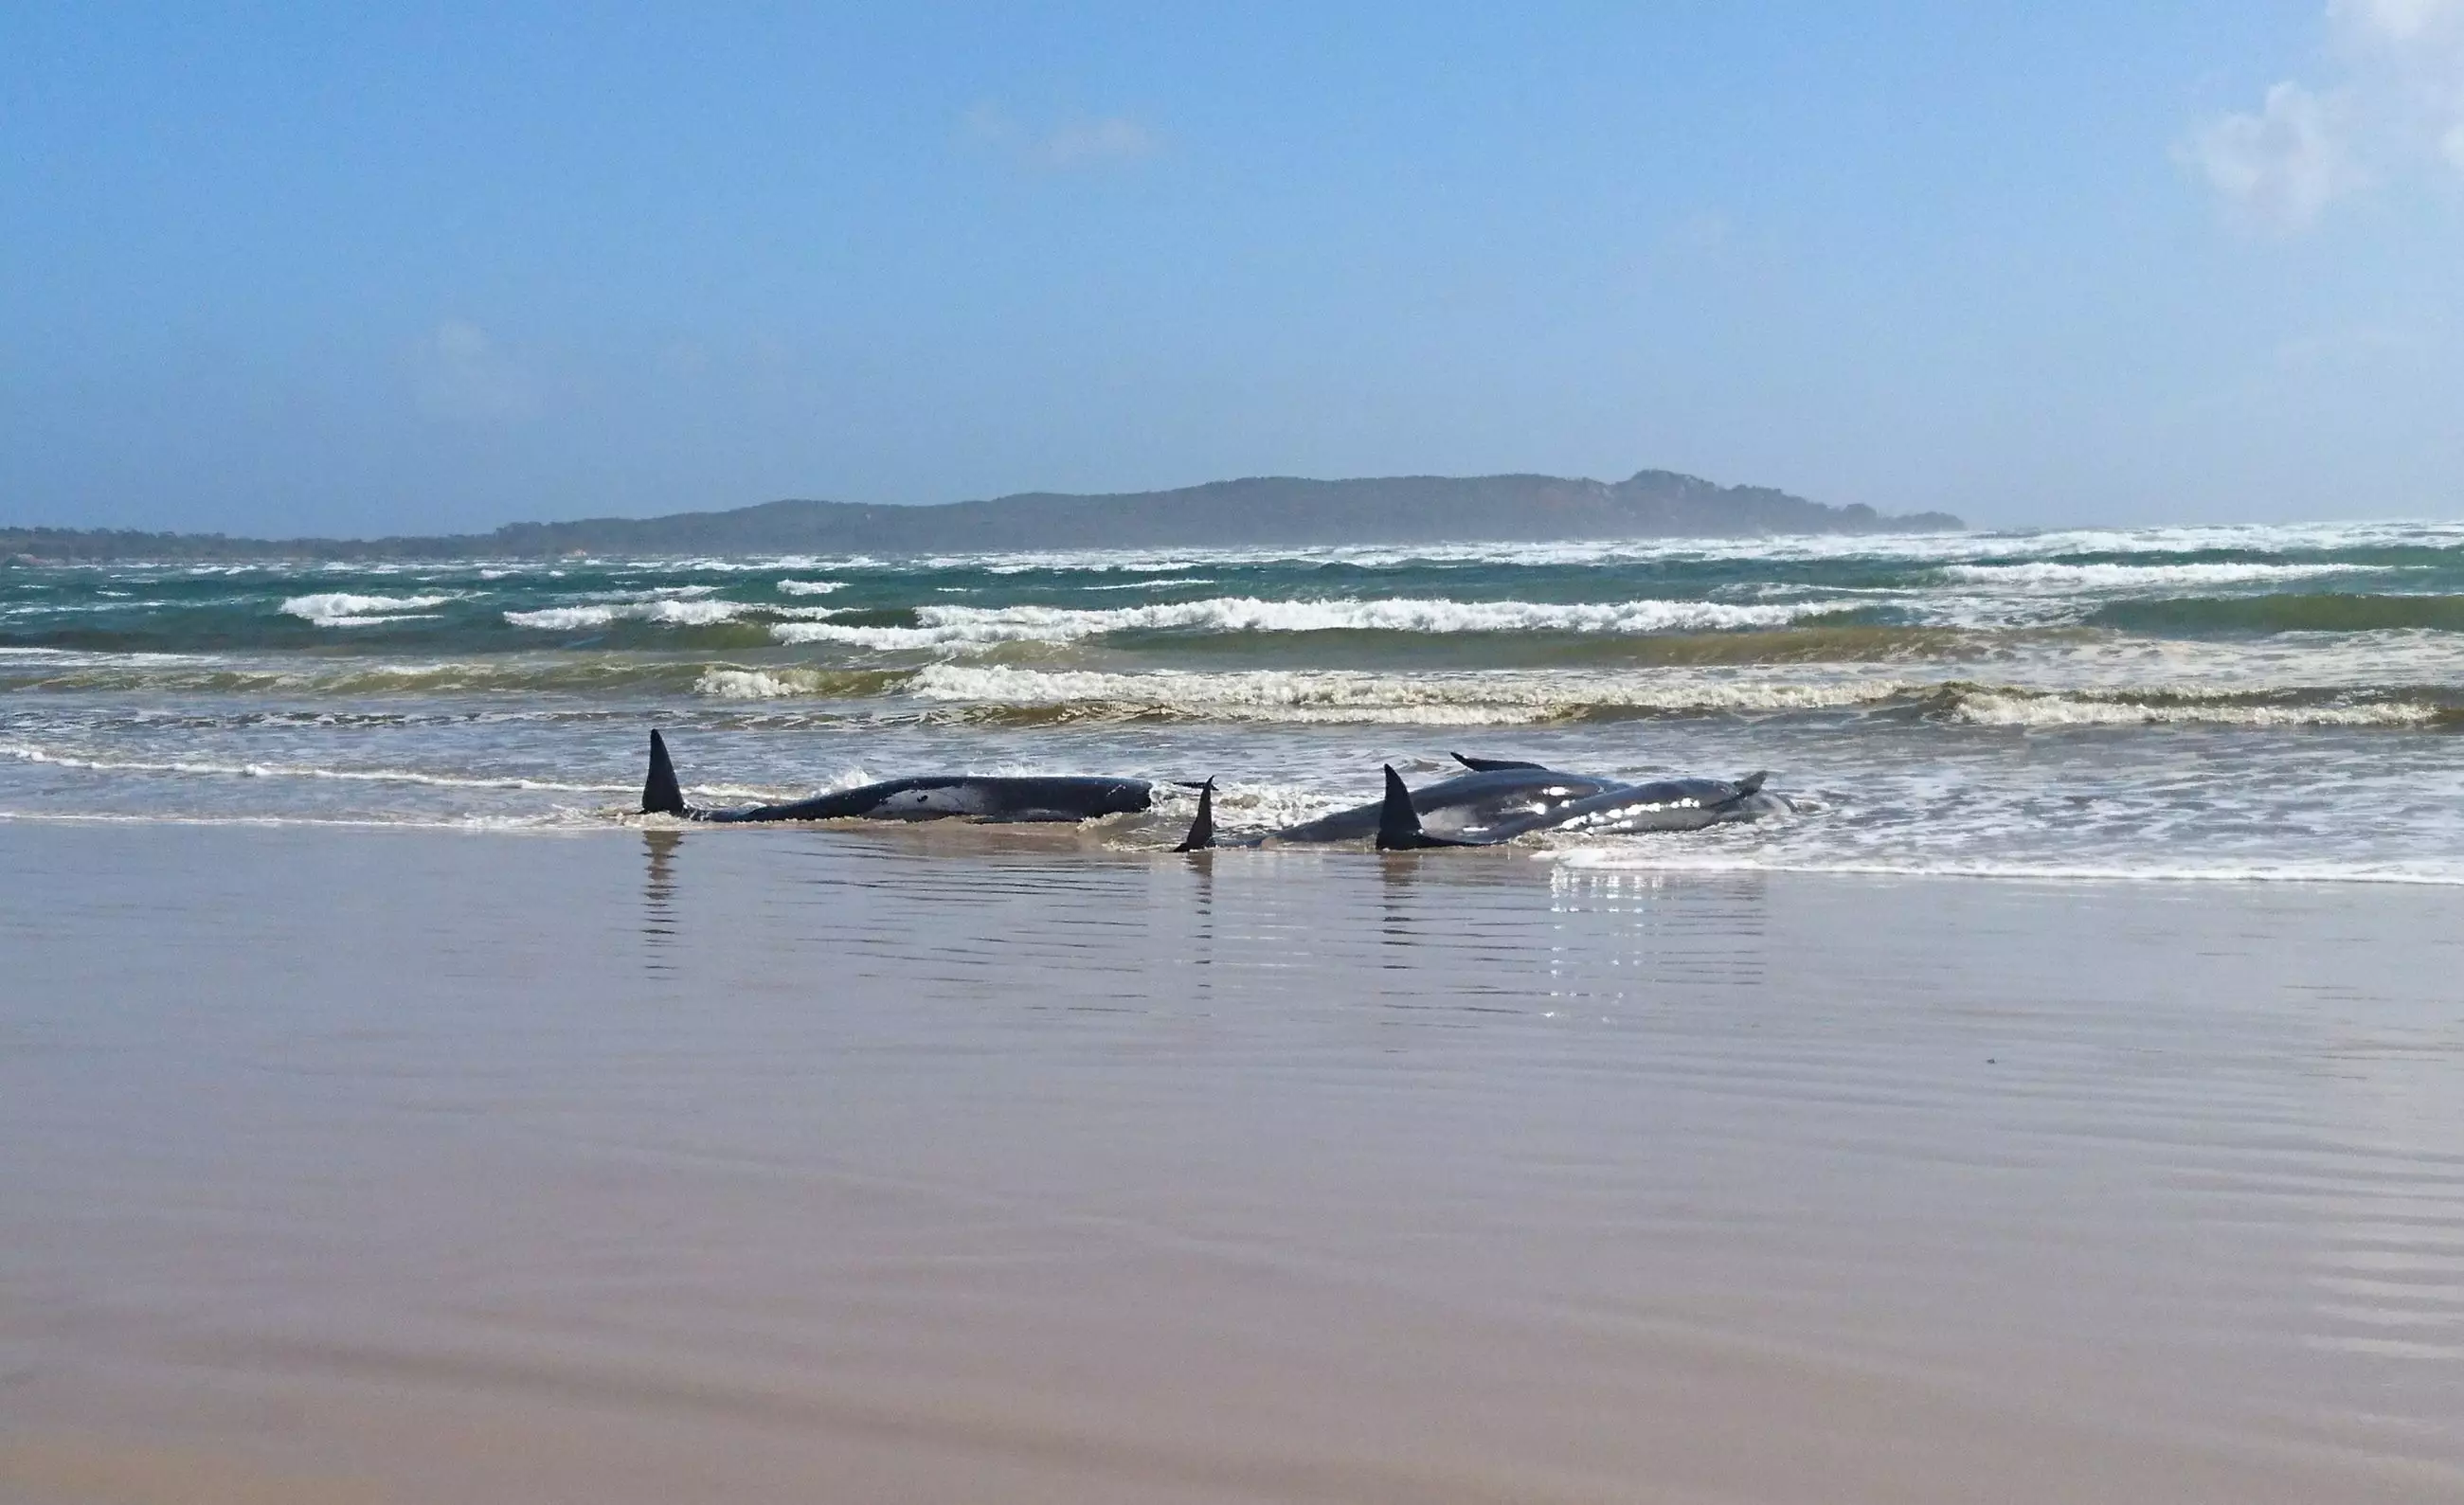 Rescue efforts are still underway to save the remaining whales (